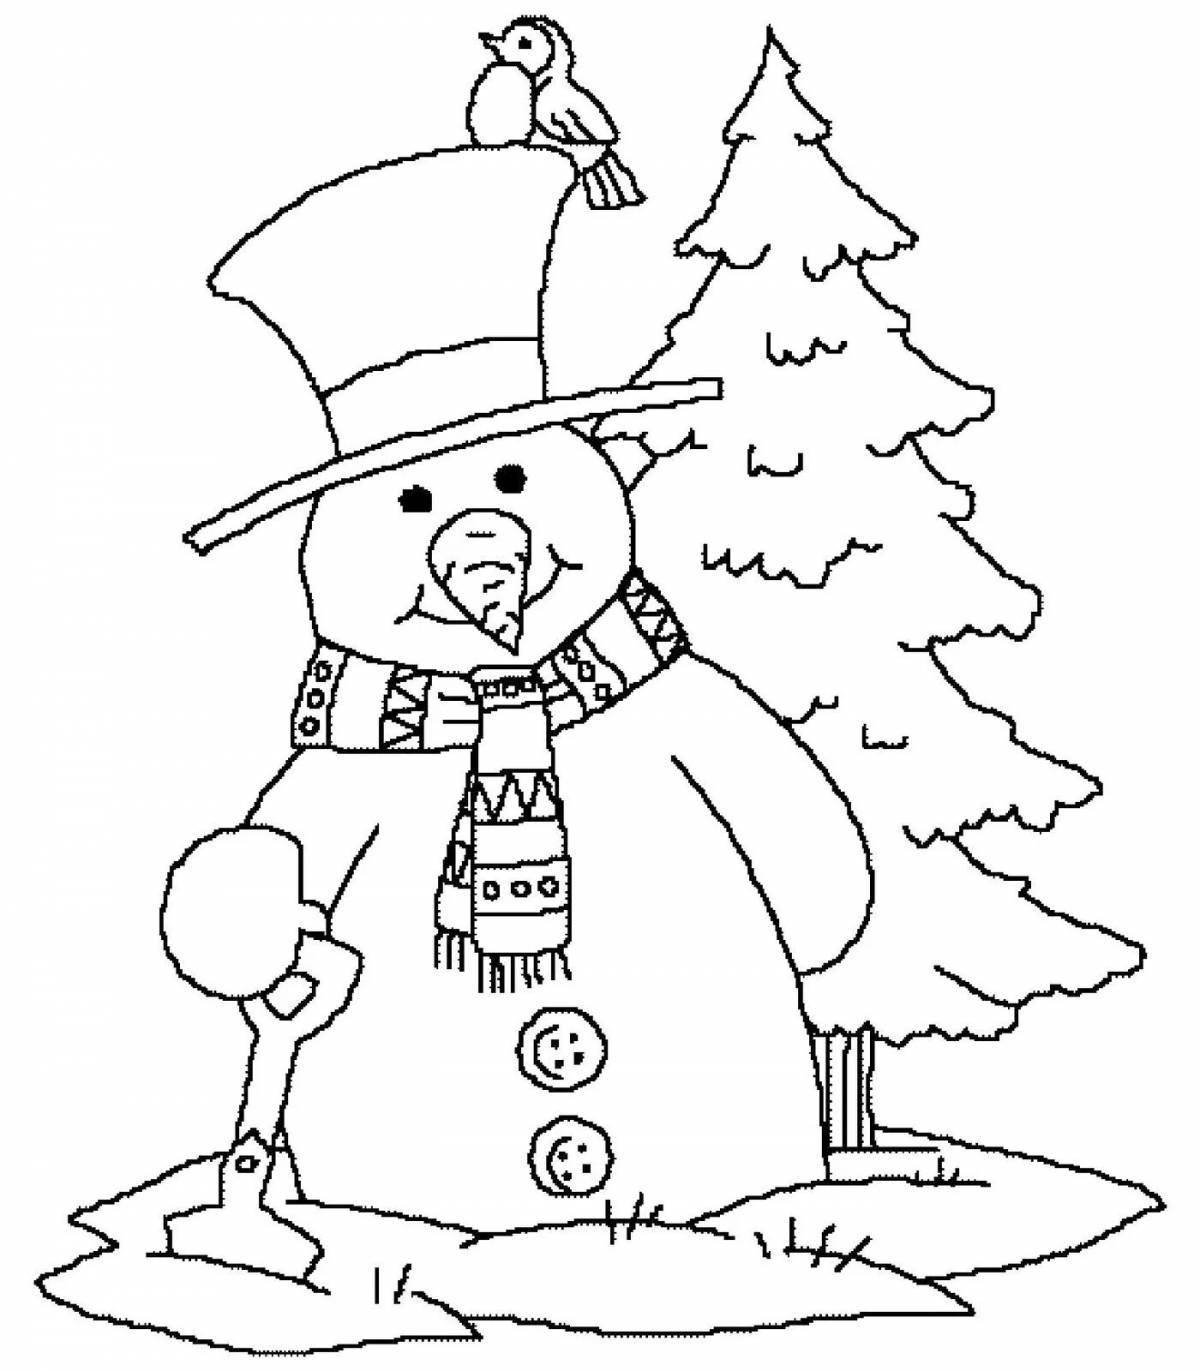 Grinning snowman coloring page